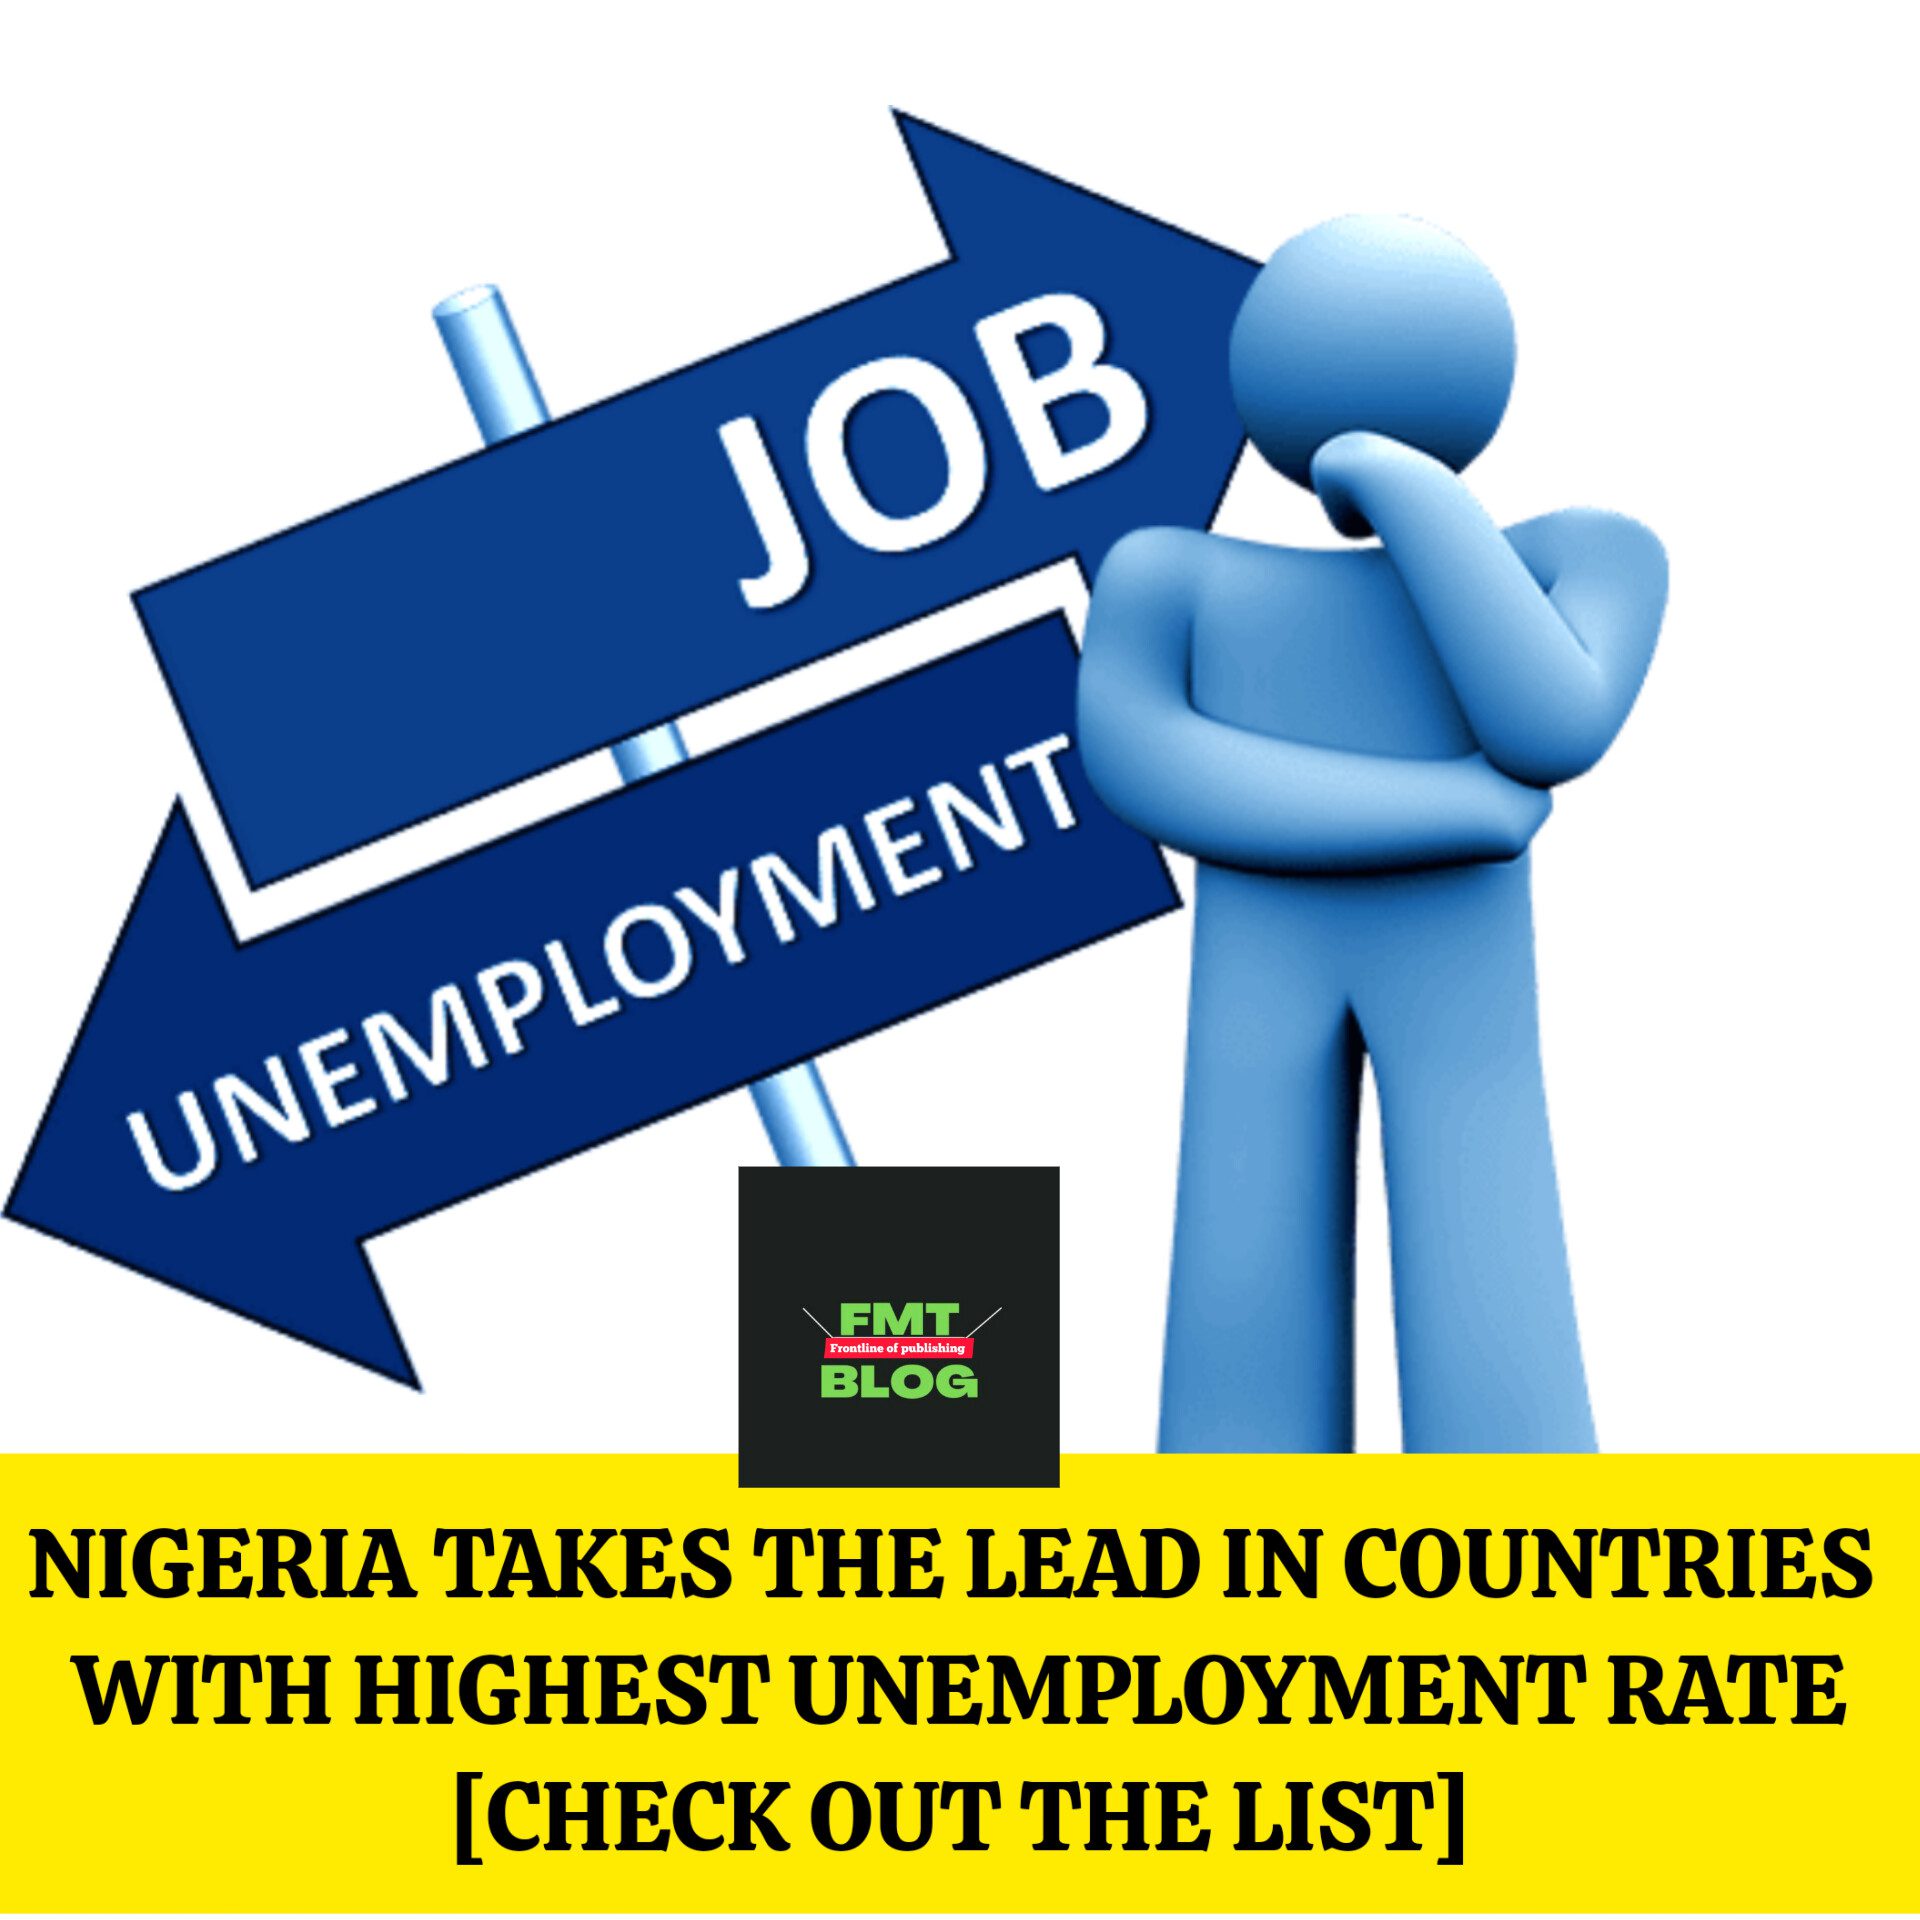 Nigeria Takes the Lead in Countries with Highest Unemployment Rate [Check Out the List]